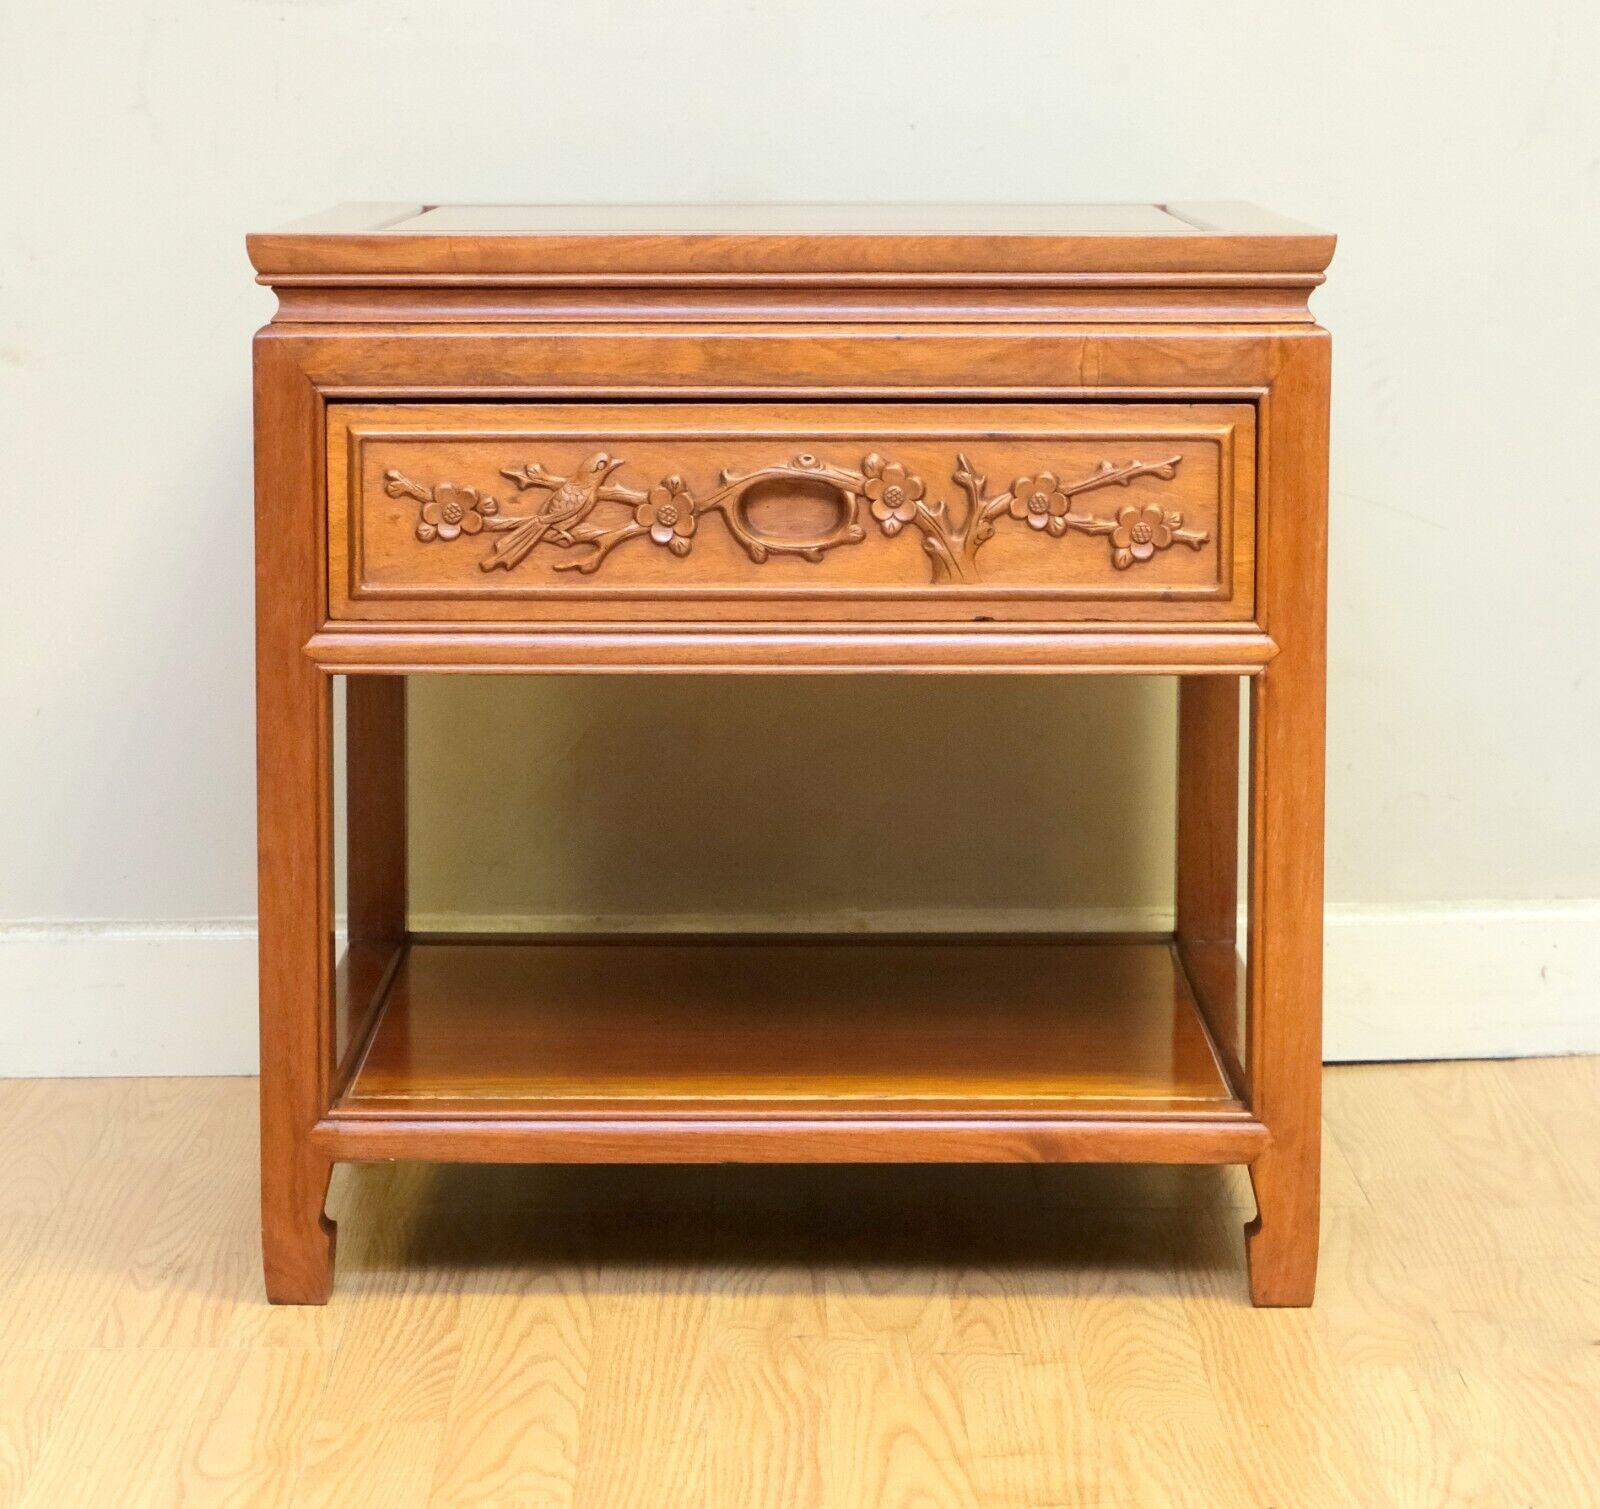 We are delighted to offer for sale this vintage Chinese hardwood side table with a single drawer and tier. 

This well made table is ideal to be used as a side or end table as it can be combined with any style. The item presents a deep and good